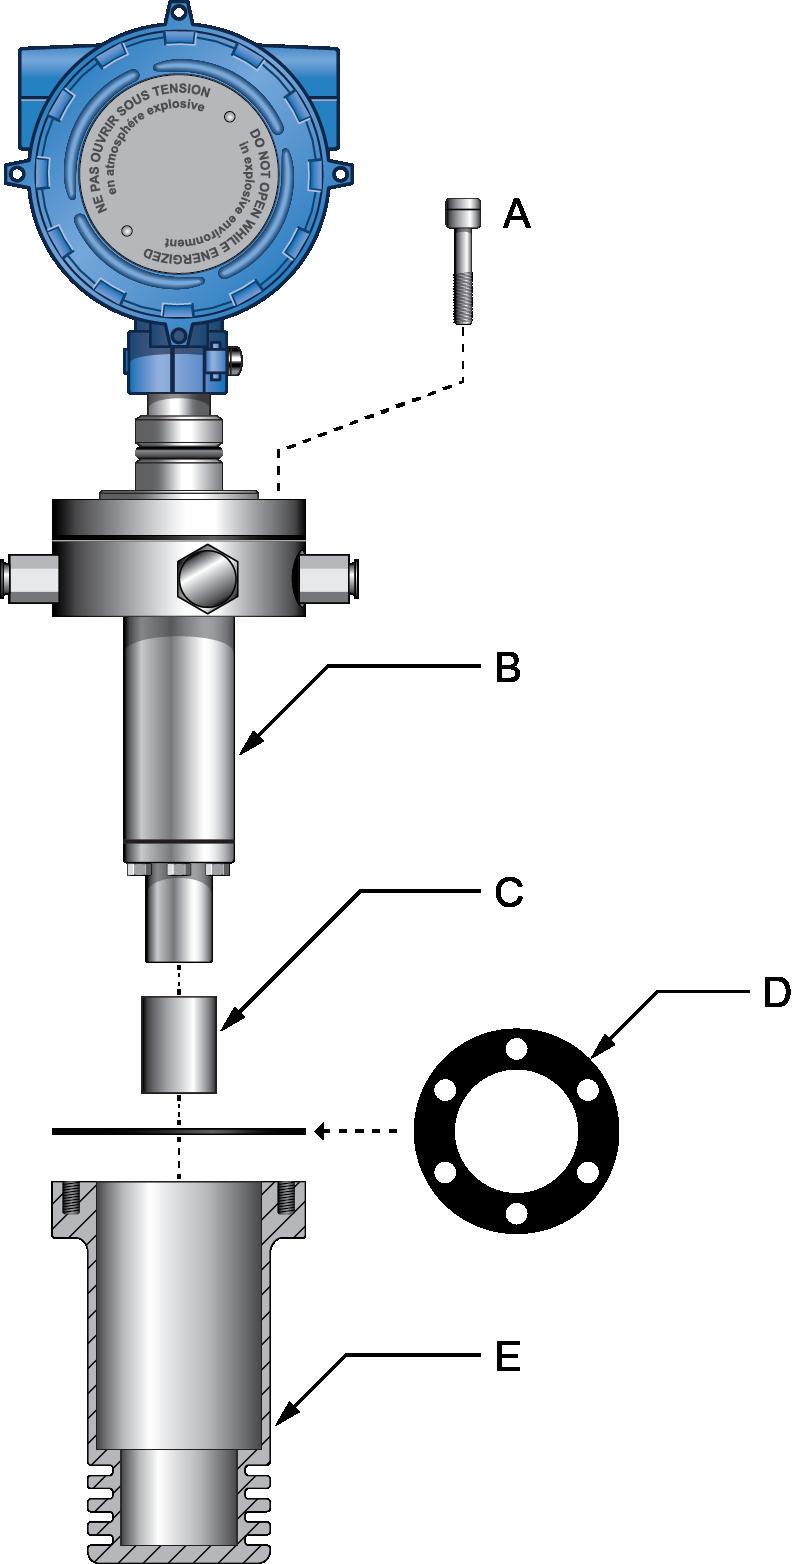 Mounting Figure 2-1: Meter installation pieces A. M8 socket-head cap screw (for mounting) B. Meter housing C. Aluminum sleeve (cylinder) D. Anti-vibration gasket E.